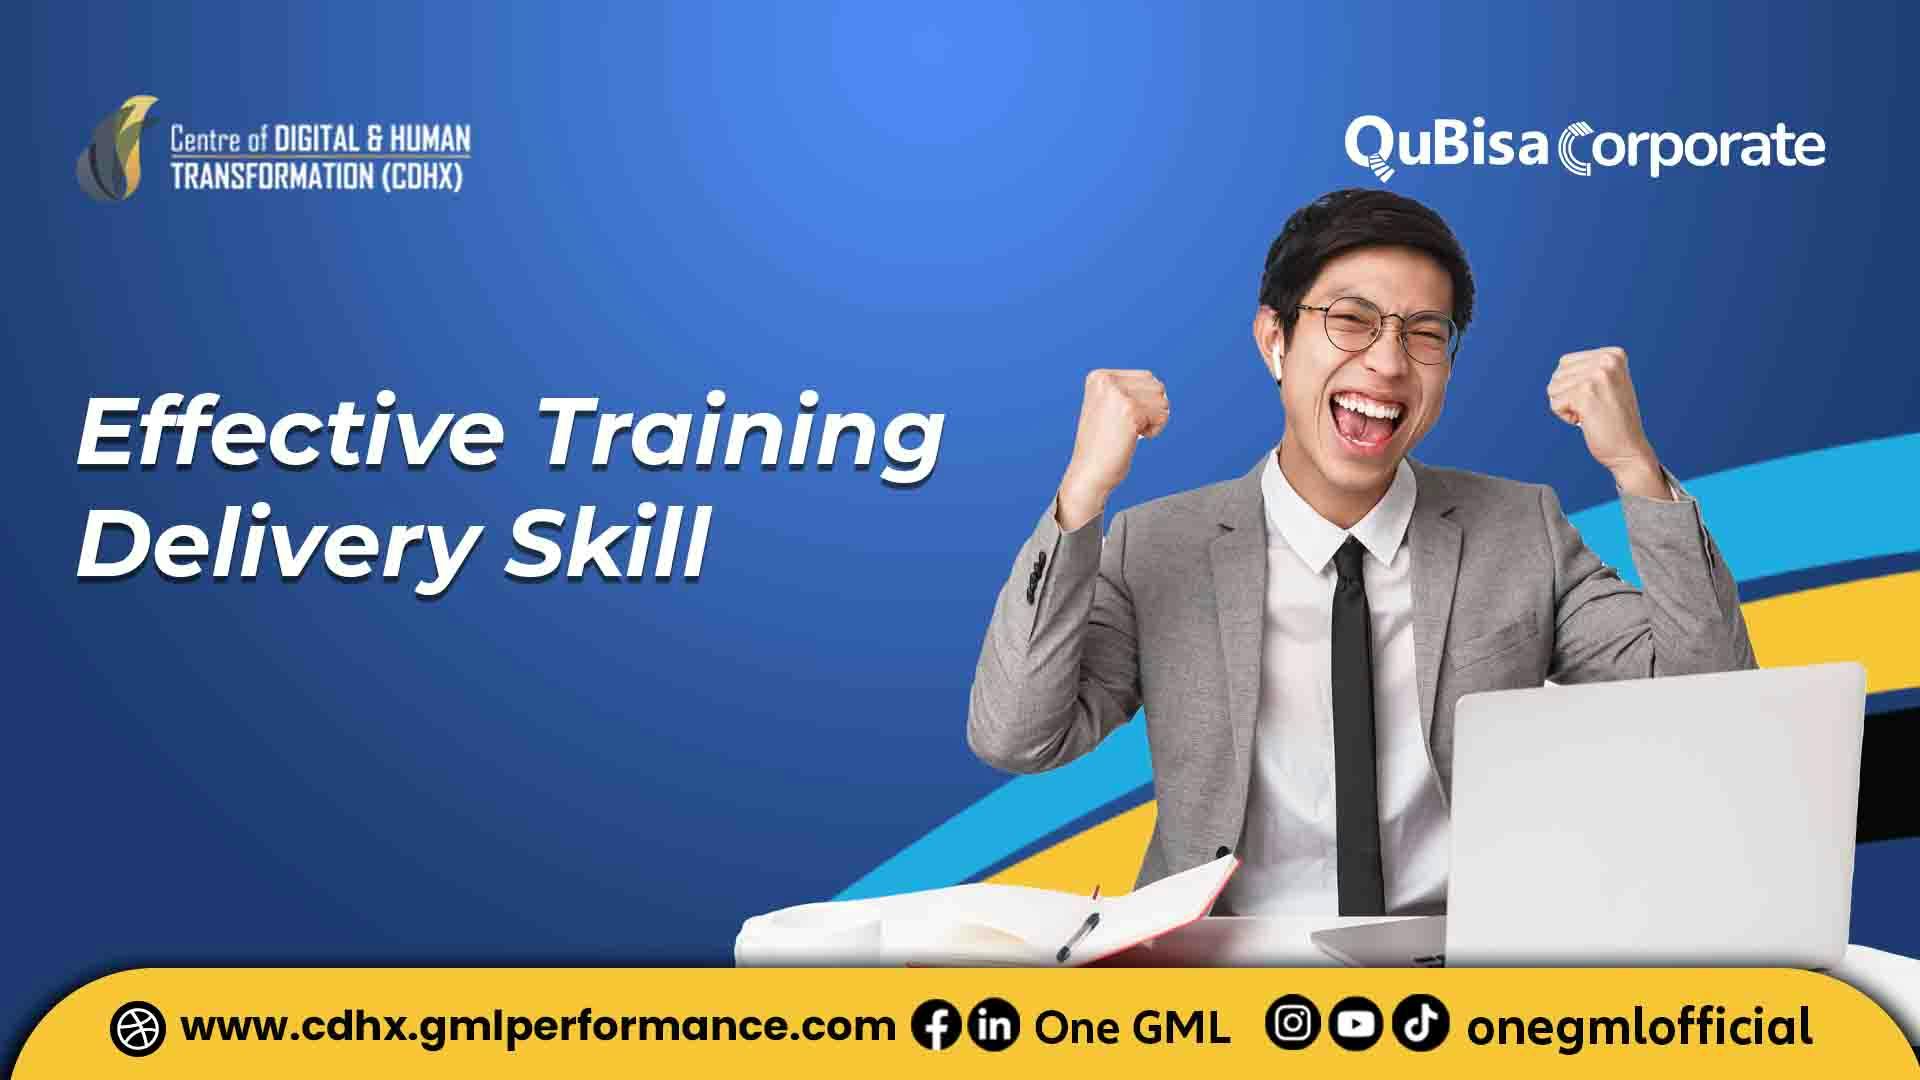 Effective Training Delivery Skill.jpg